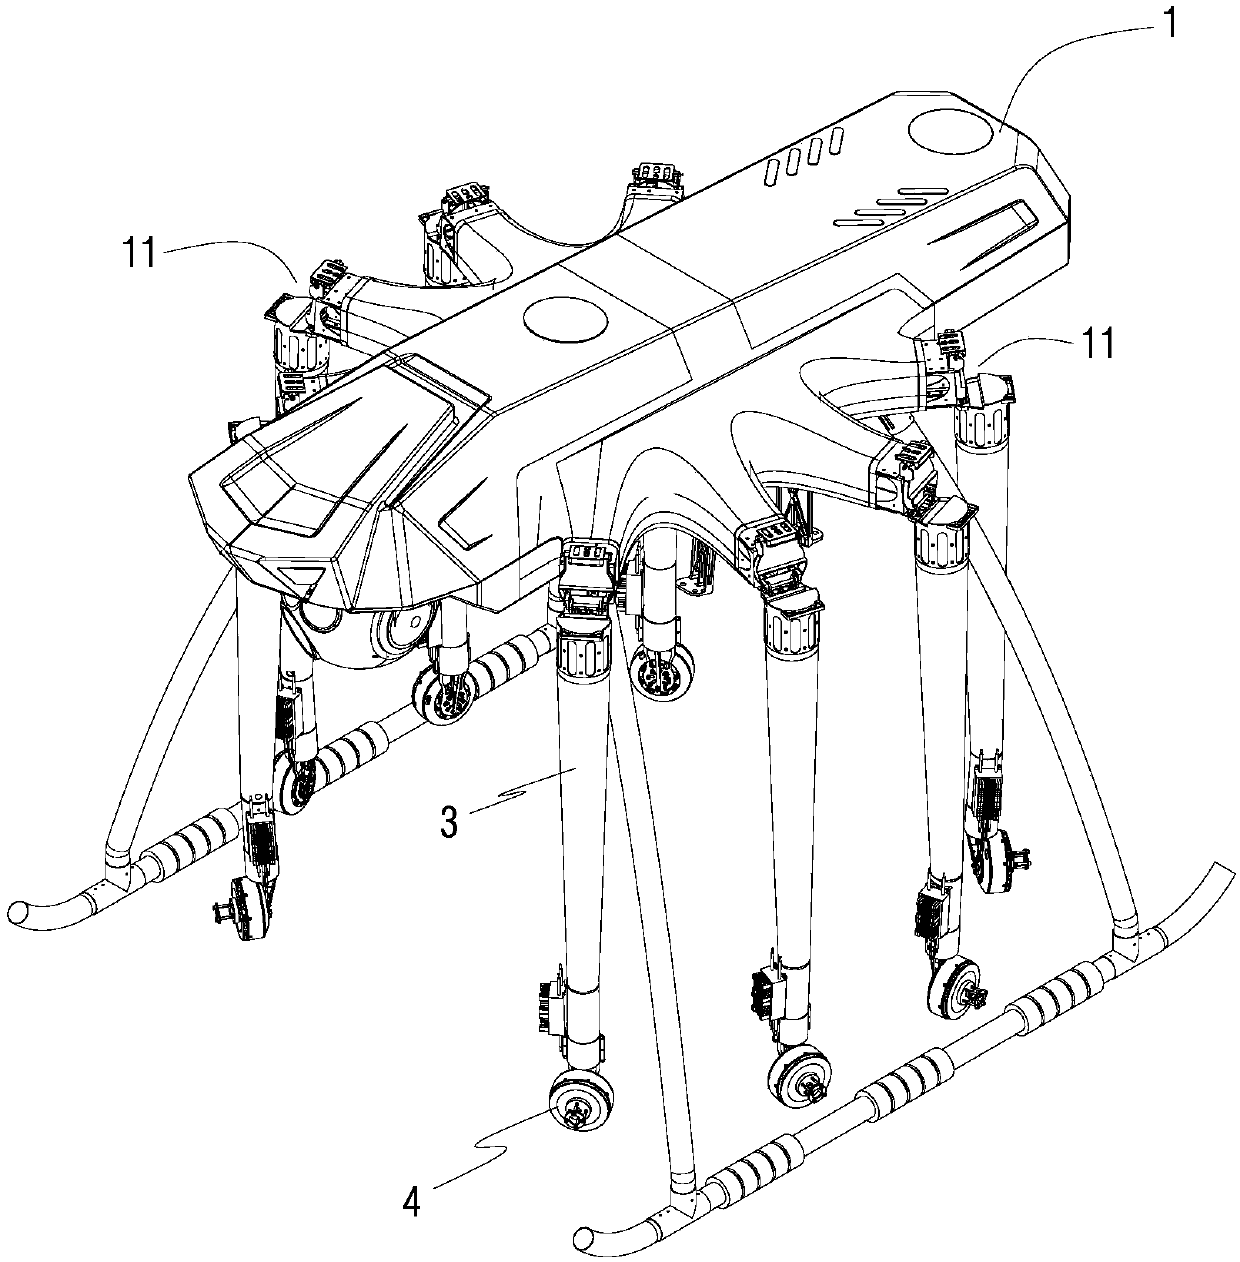 Cantilever folding mechanism of electric unmanned aerial vehicle